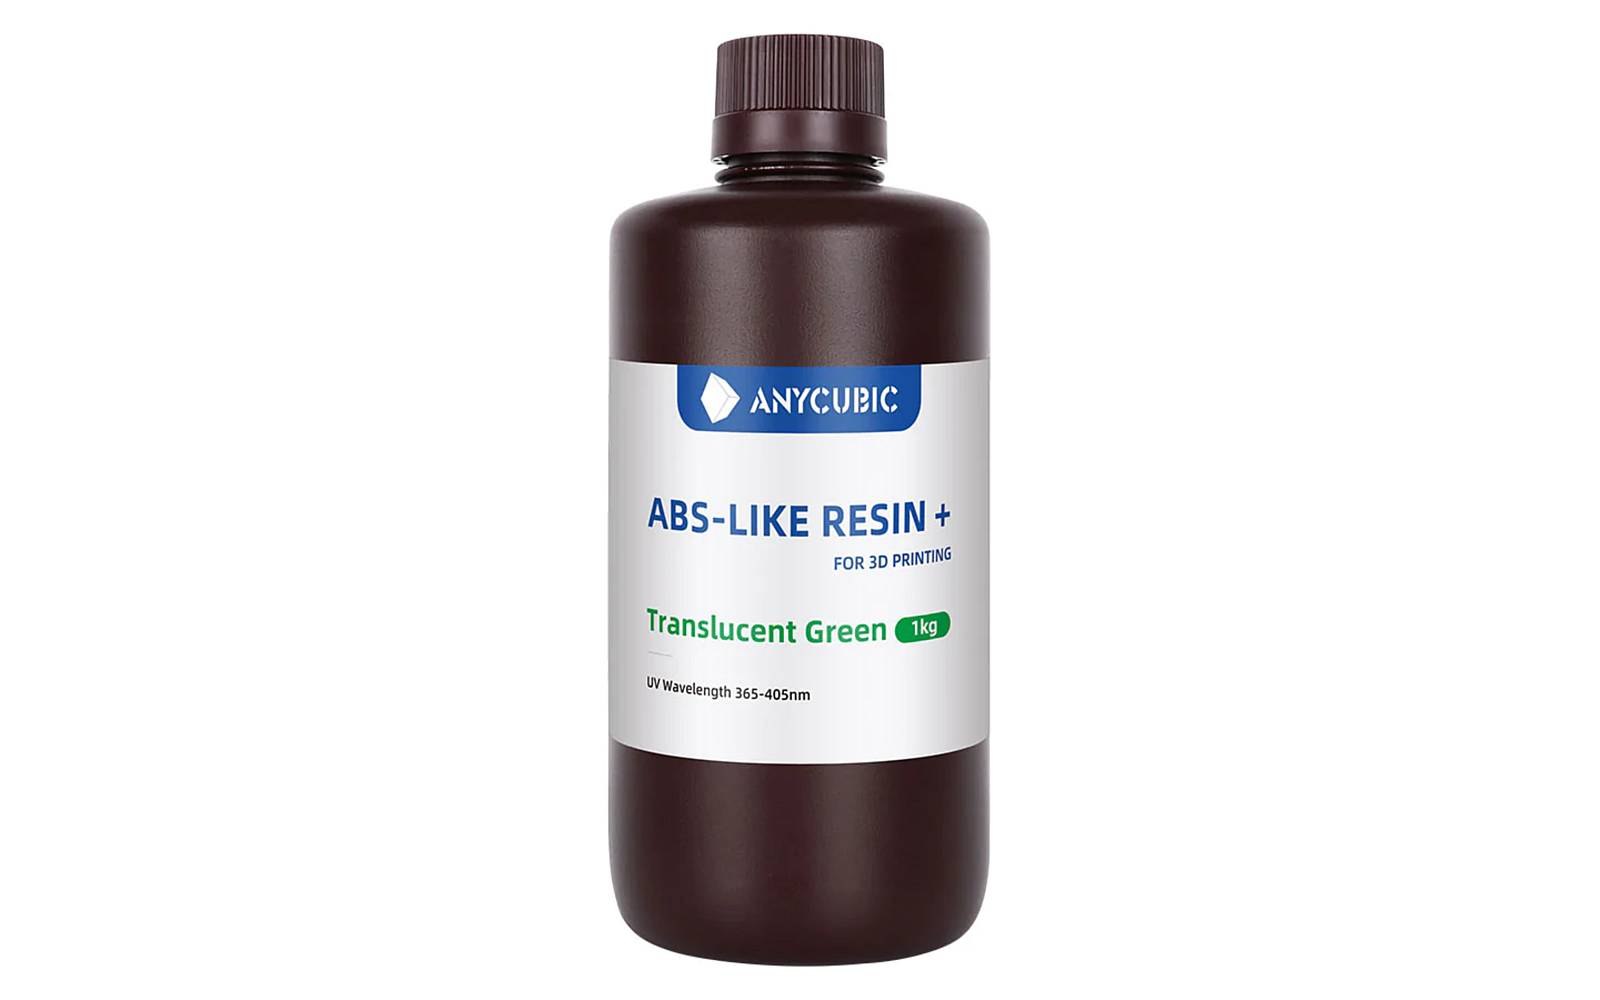 Anycubic ABS-Like Resin+ Translucent Green